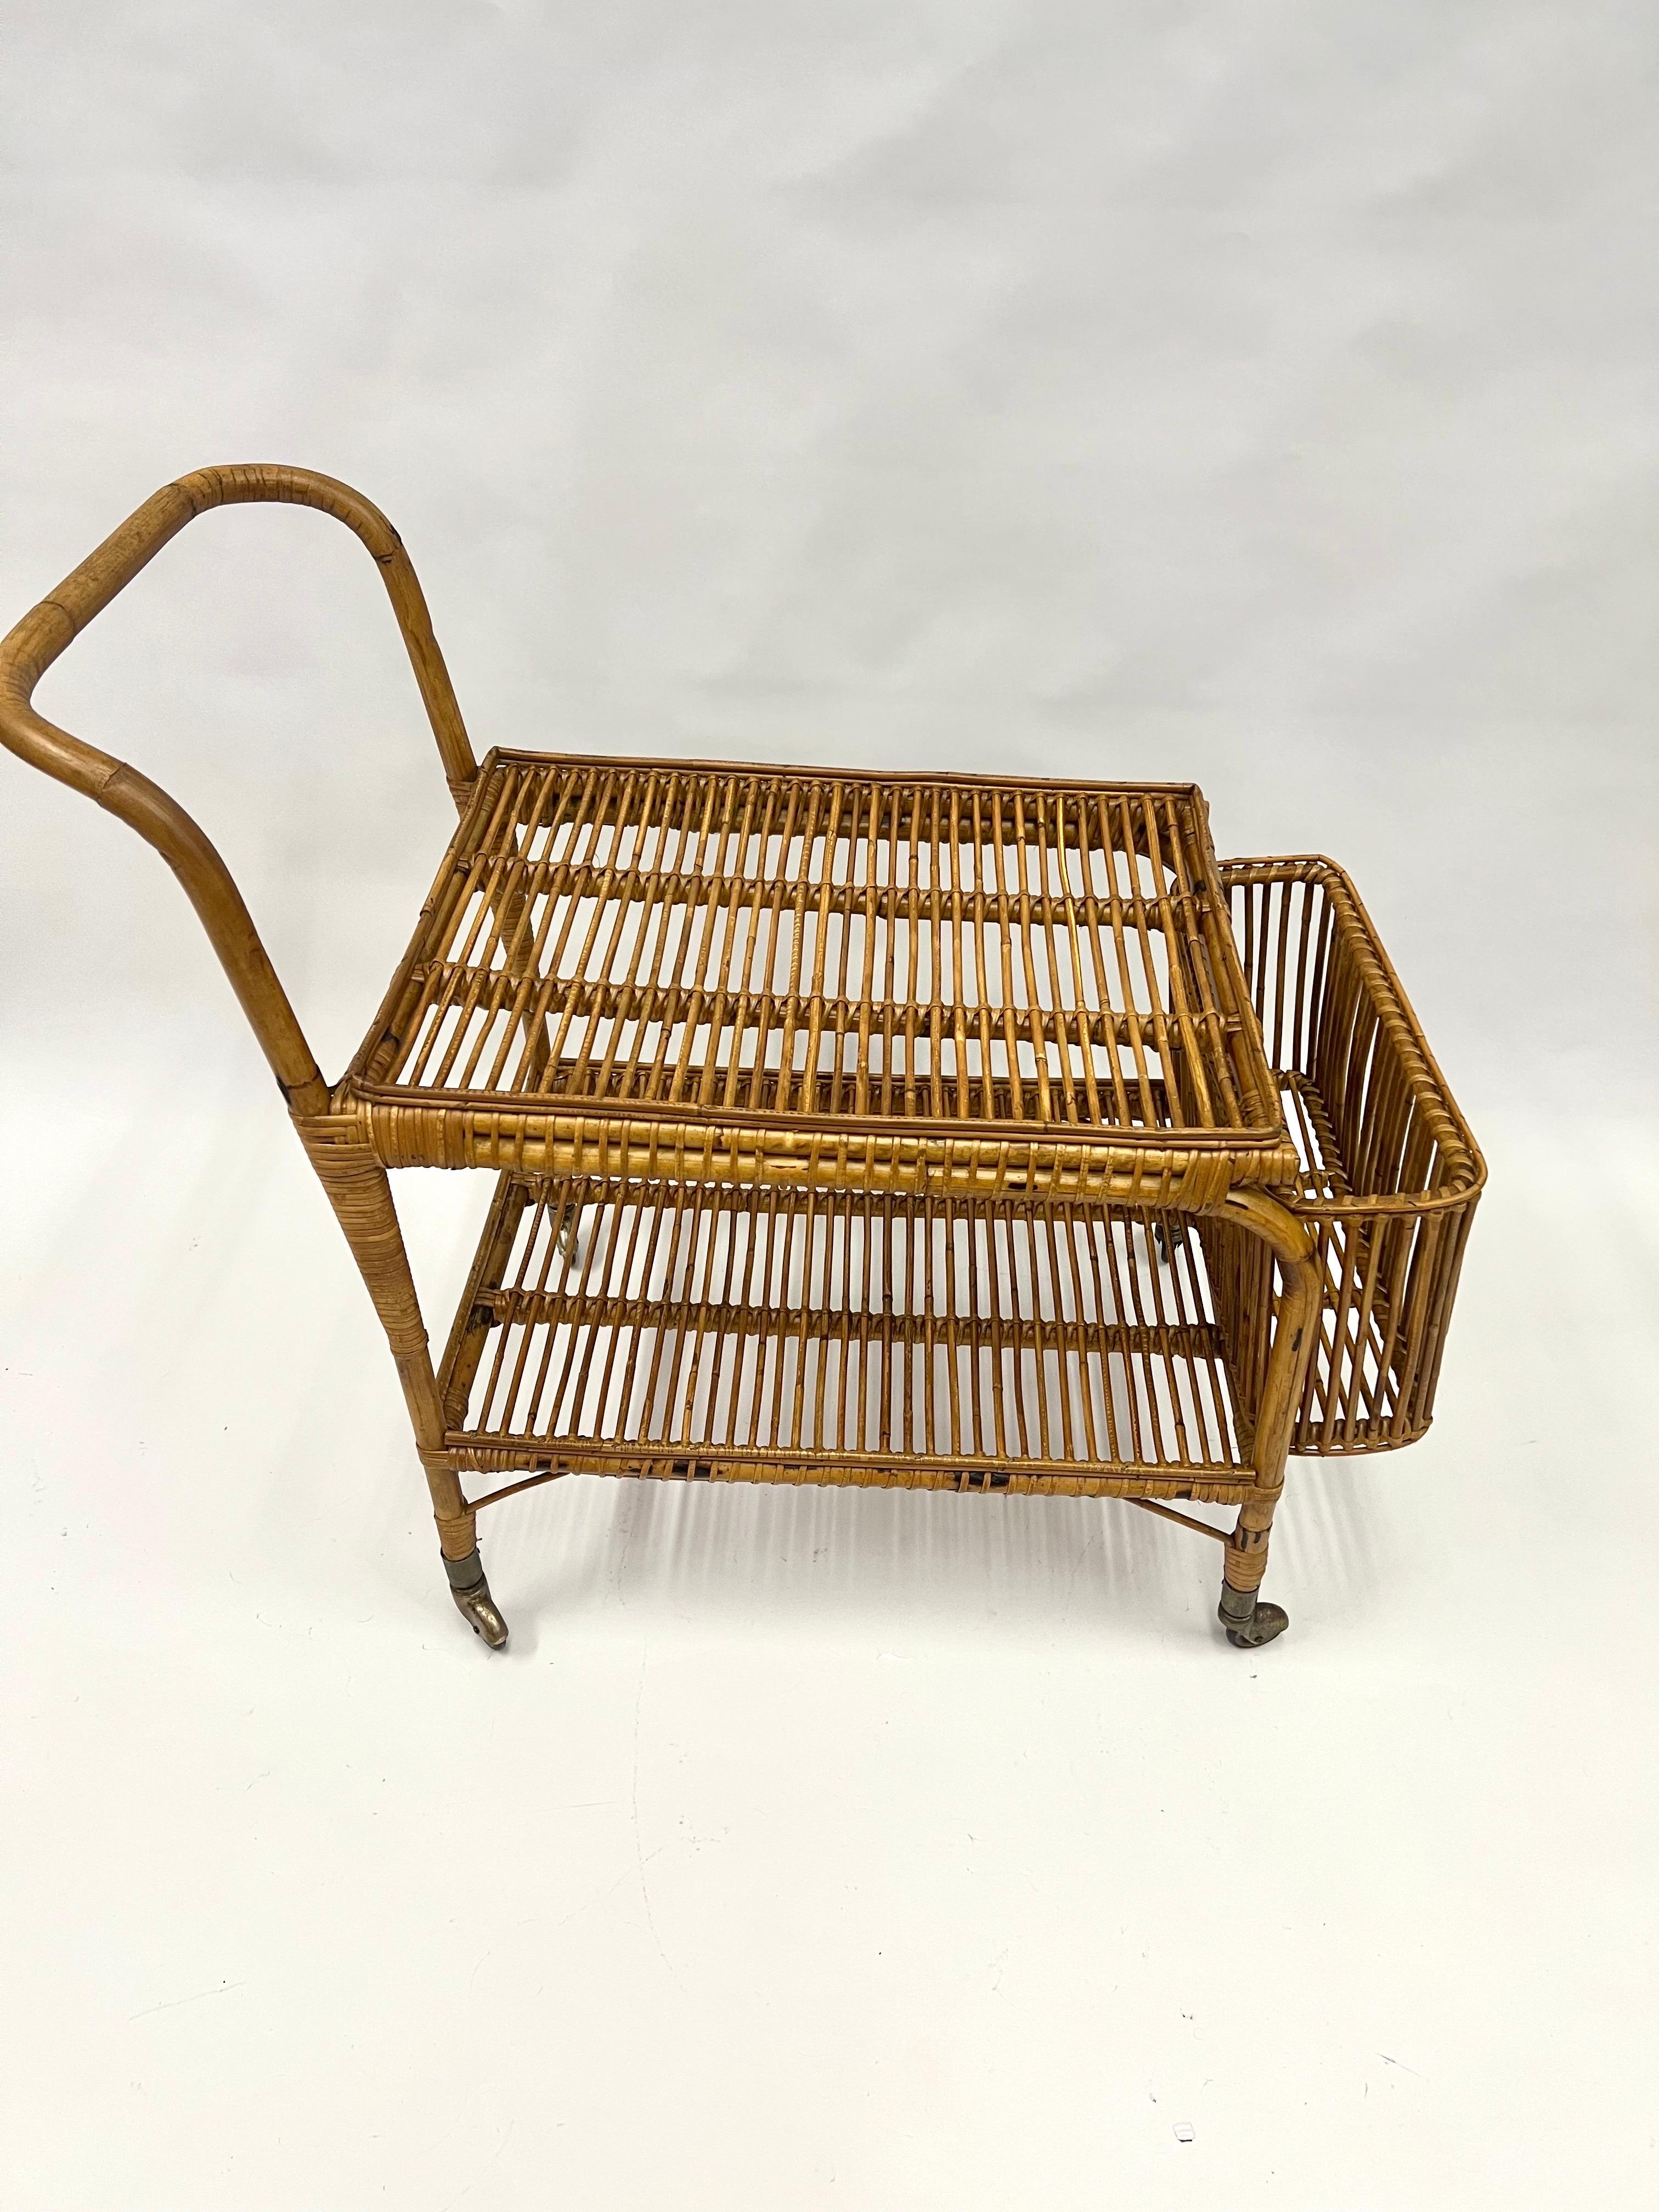 Italian Mid-Century Modern Bamboo and Rattan Bar / Serving Cart by Franco Albini For Sale 5